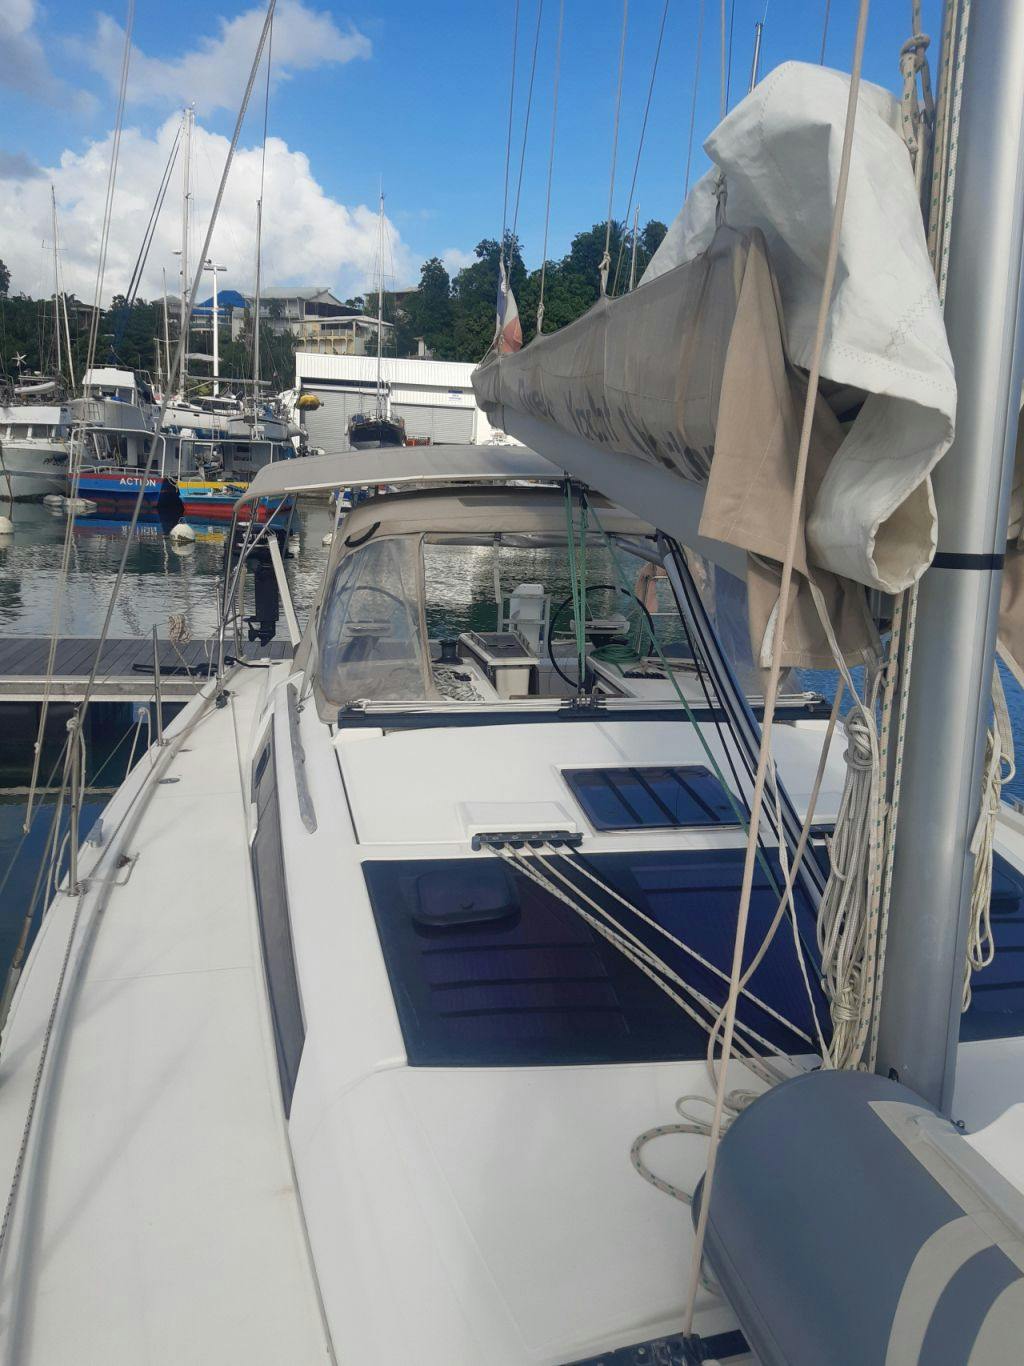 Book Dufour 390 GL Sailing yacht for bareboat charter in Martinique, Le Marin, Martinique, Caribbean with TripYacht!, picture 4